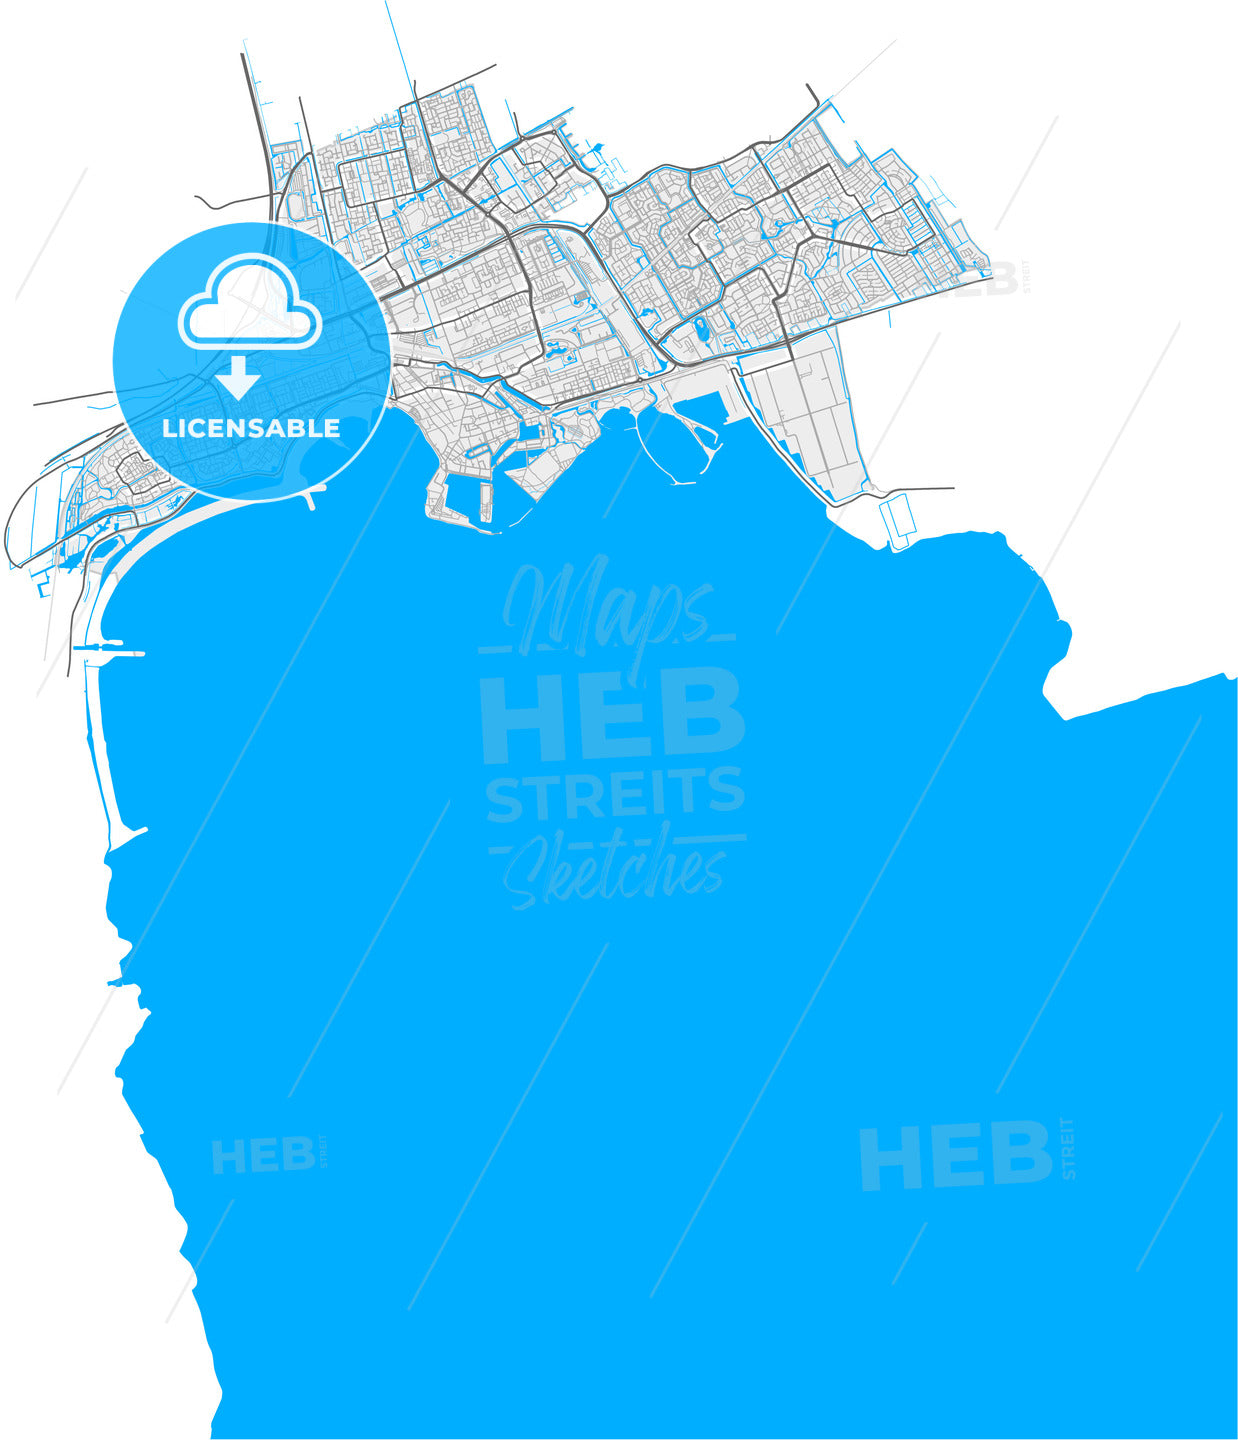 Hoorn, North Holland, Netherlands, high quality vector map